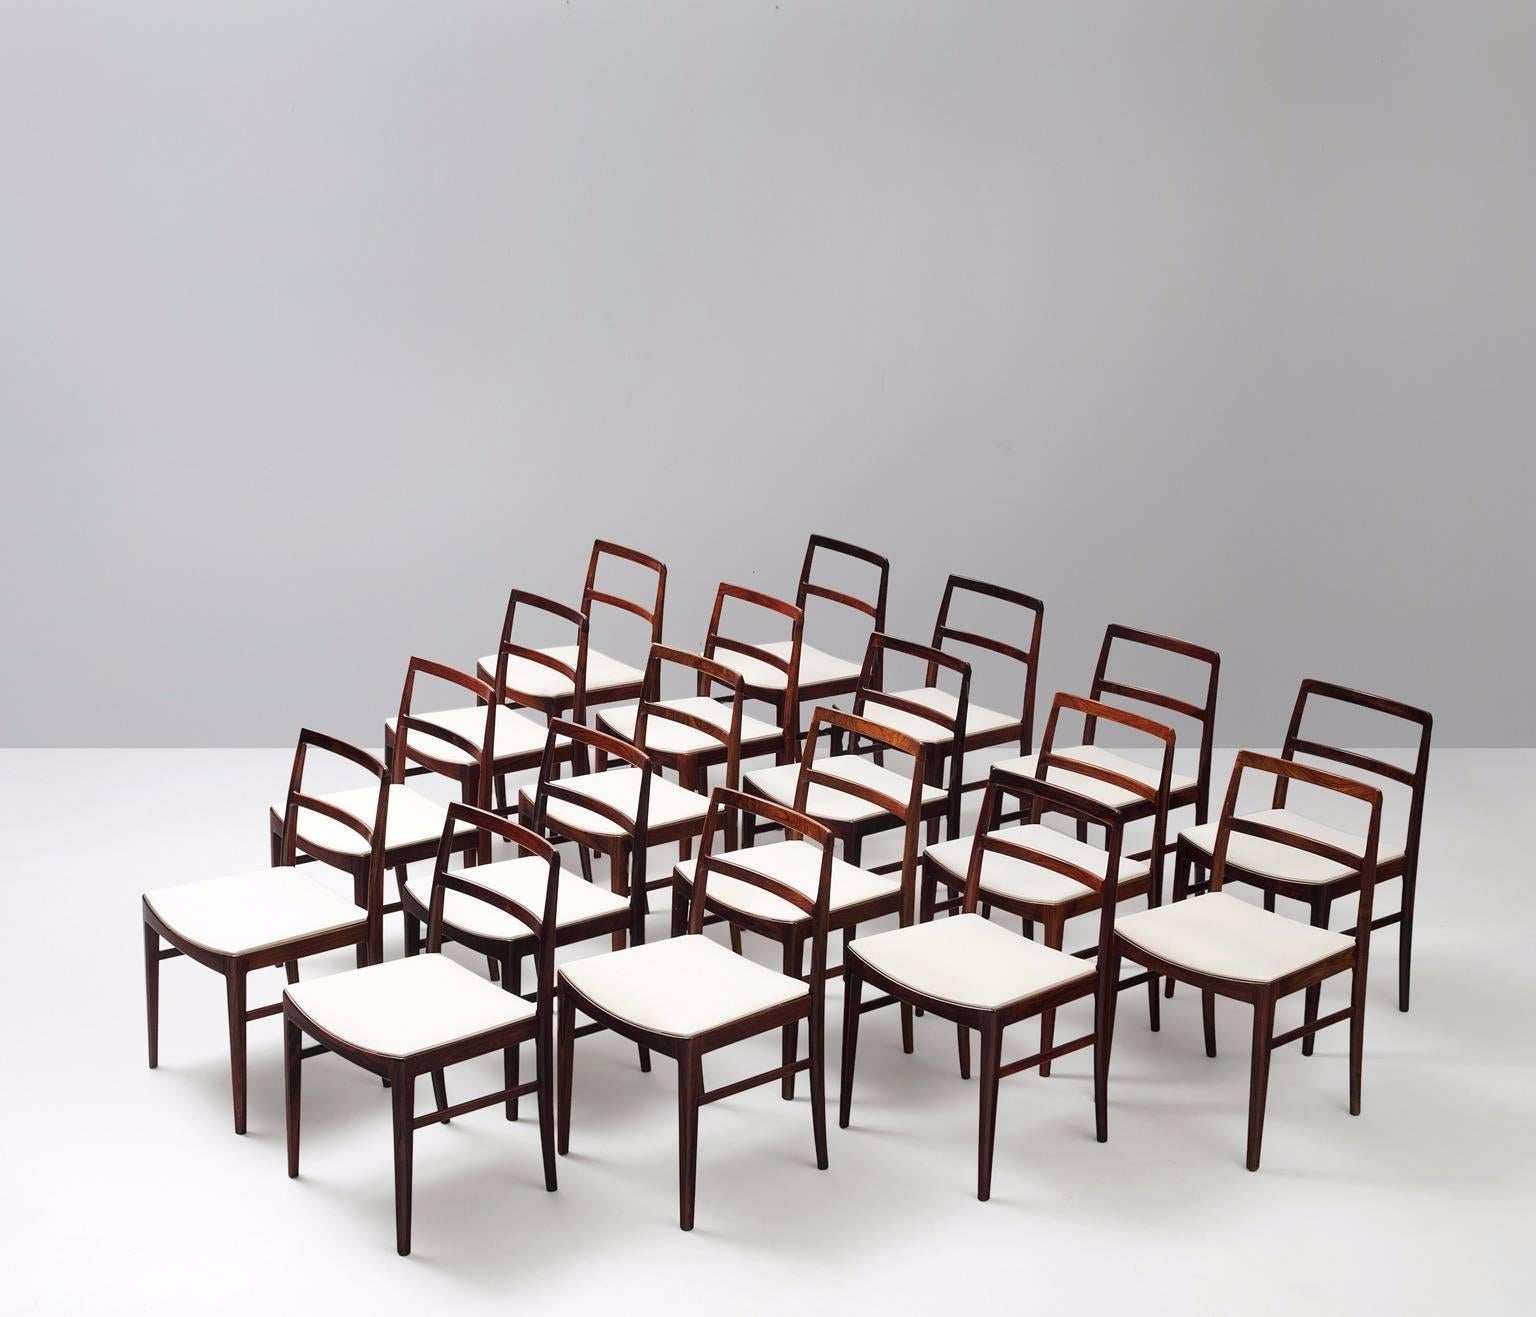 Set of 18 dining chairs, model '430,' rosewood and fabric, Arne Vodder for Sibast Møbler, Denmark 1960s. 

Large set of 18 dining chairs by the great Danish designer Arne Vodder. Modest and elegant chairs with rosewood frame. The basic and linear